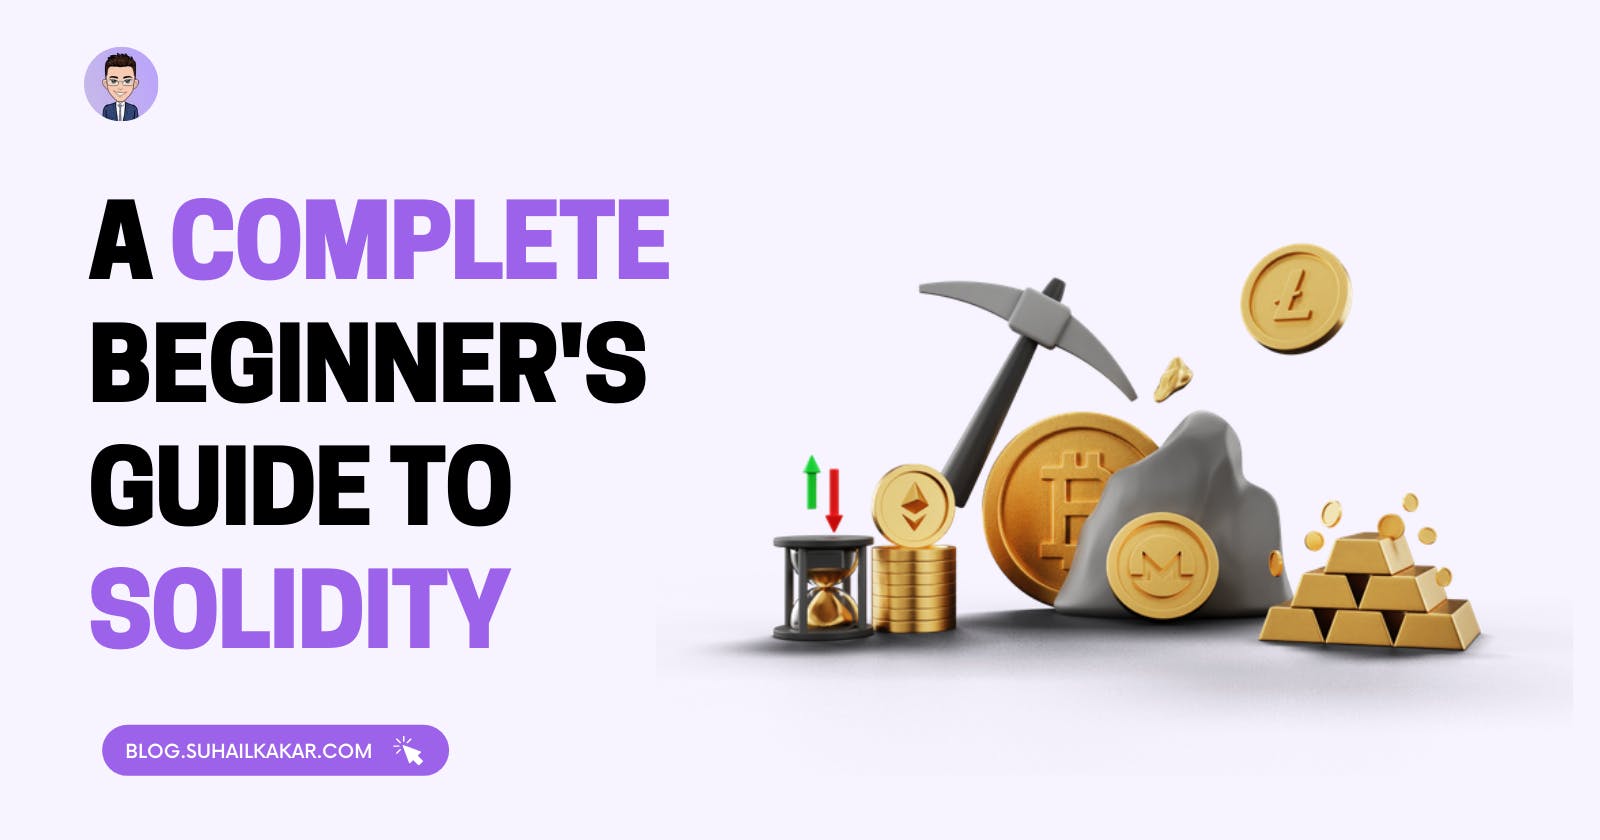 A Complete Beginner's Guide to Solidity